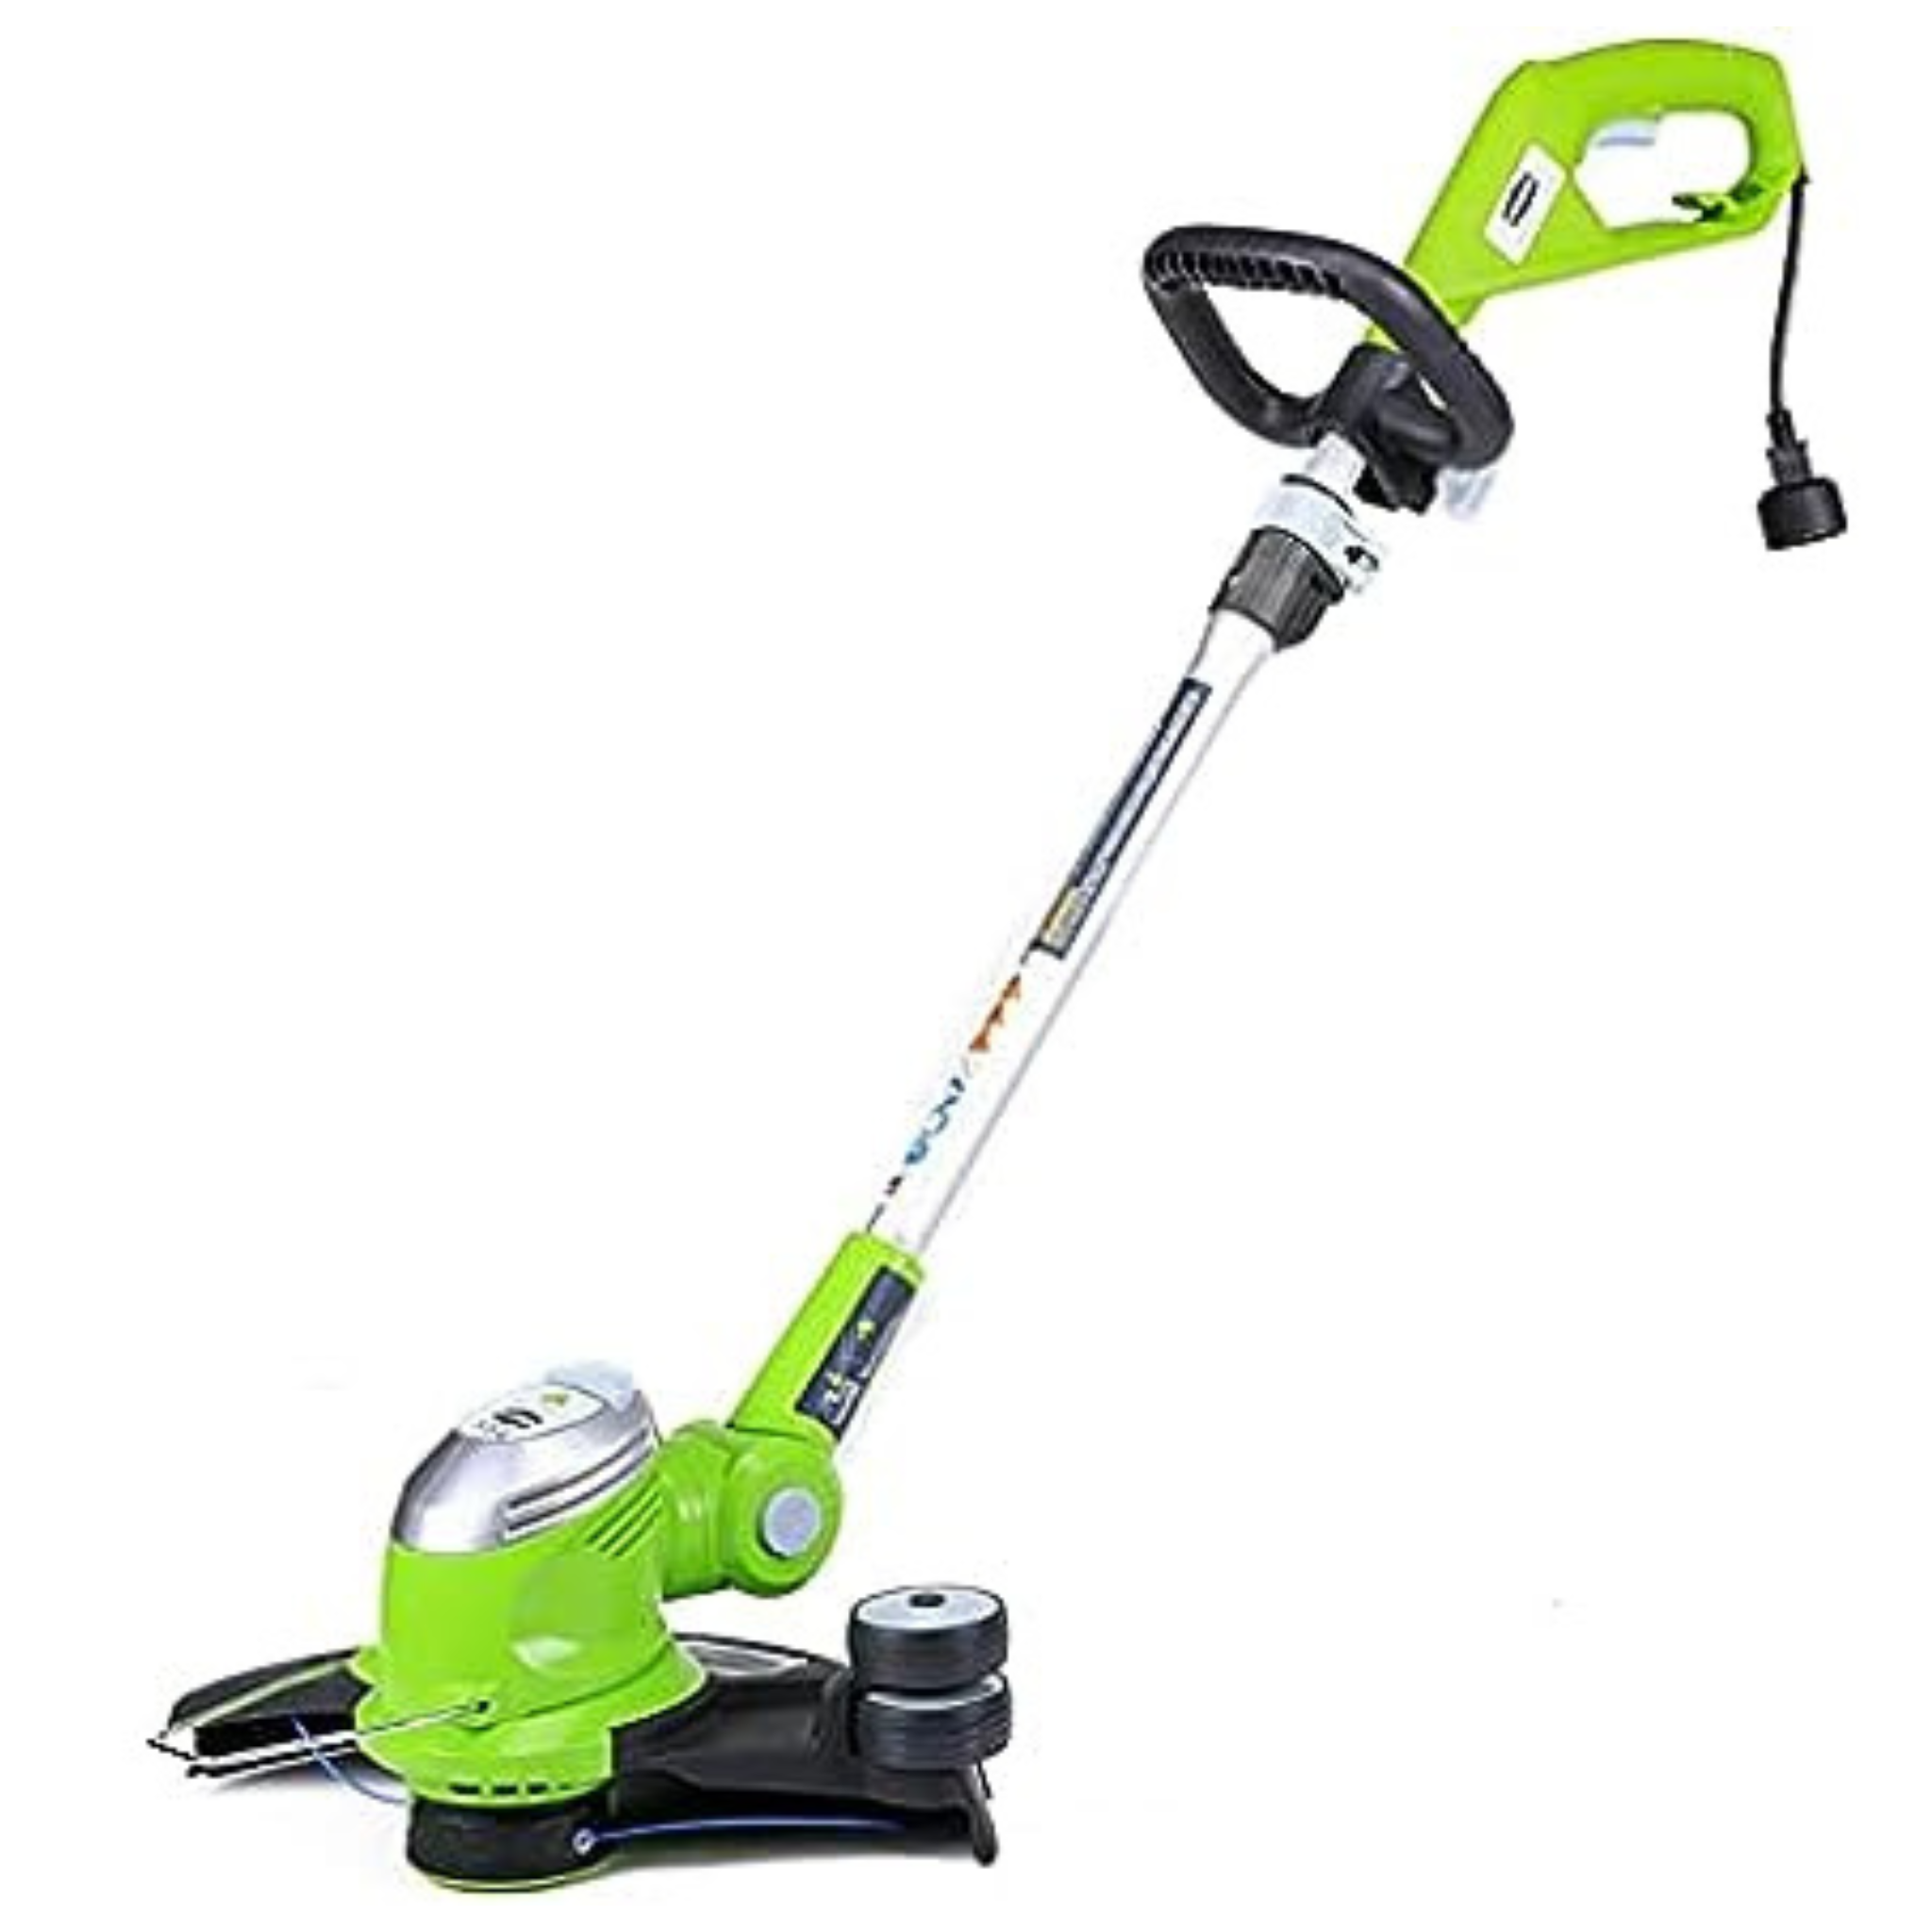 Greenworks 5.5 Amp 15-Inch Corded Electric String Trimmer